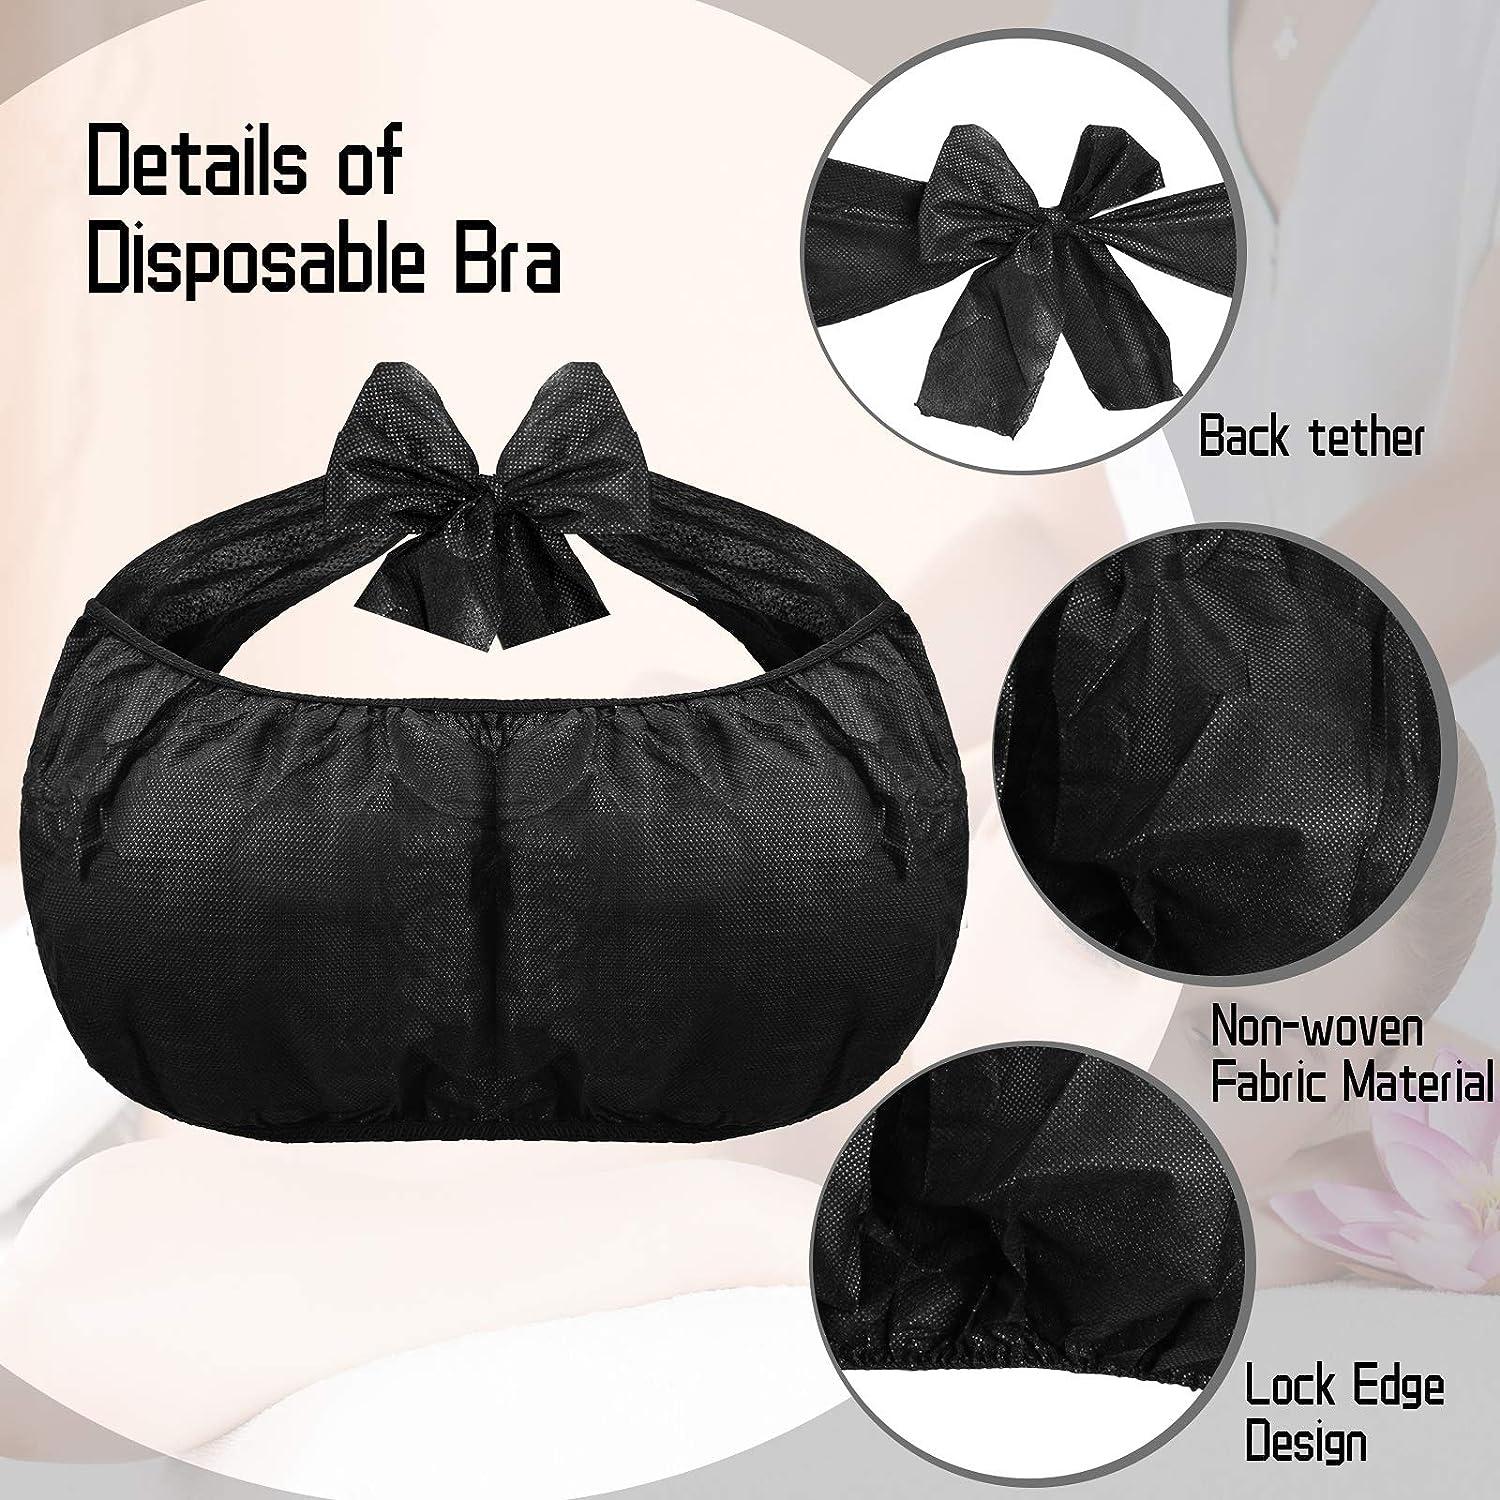 Mackneog Women's Disposable Bras Disposable Spa Top Underwear Br ieres Tops  One Size Black,Gift,on Clearance 